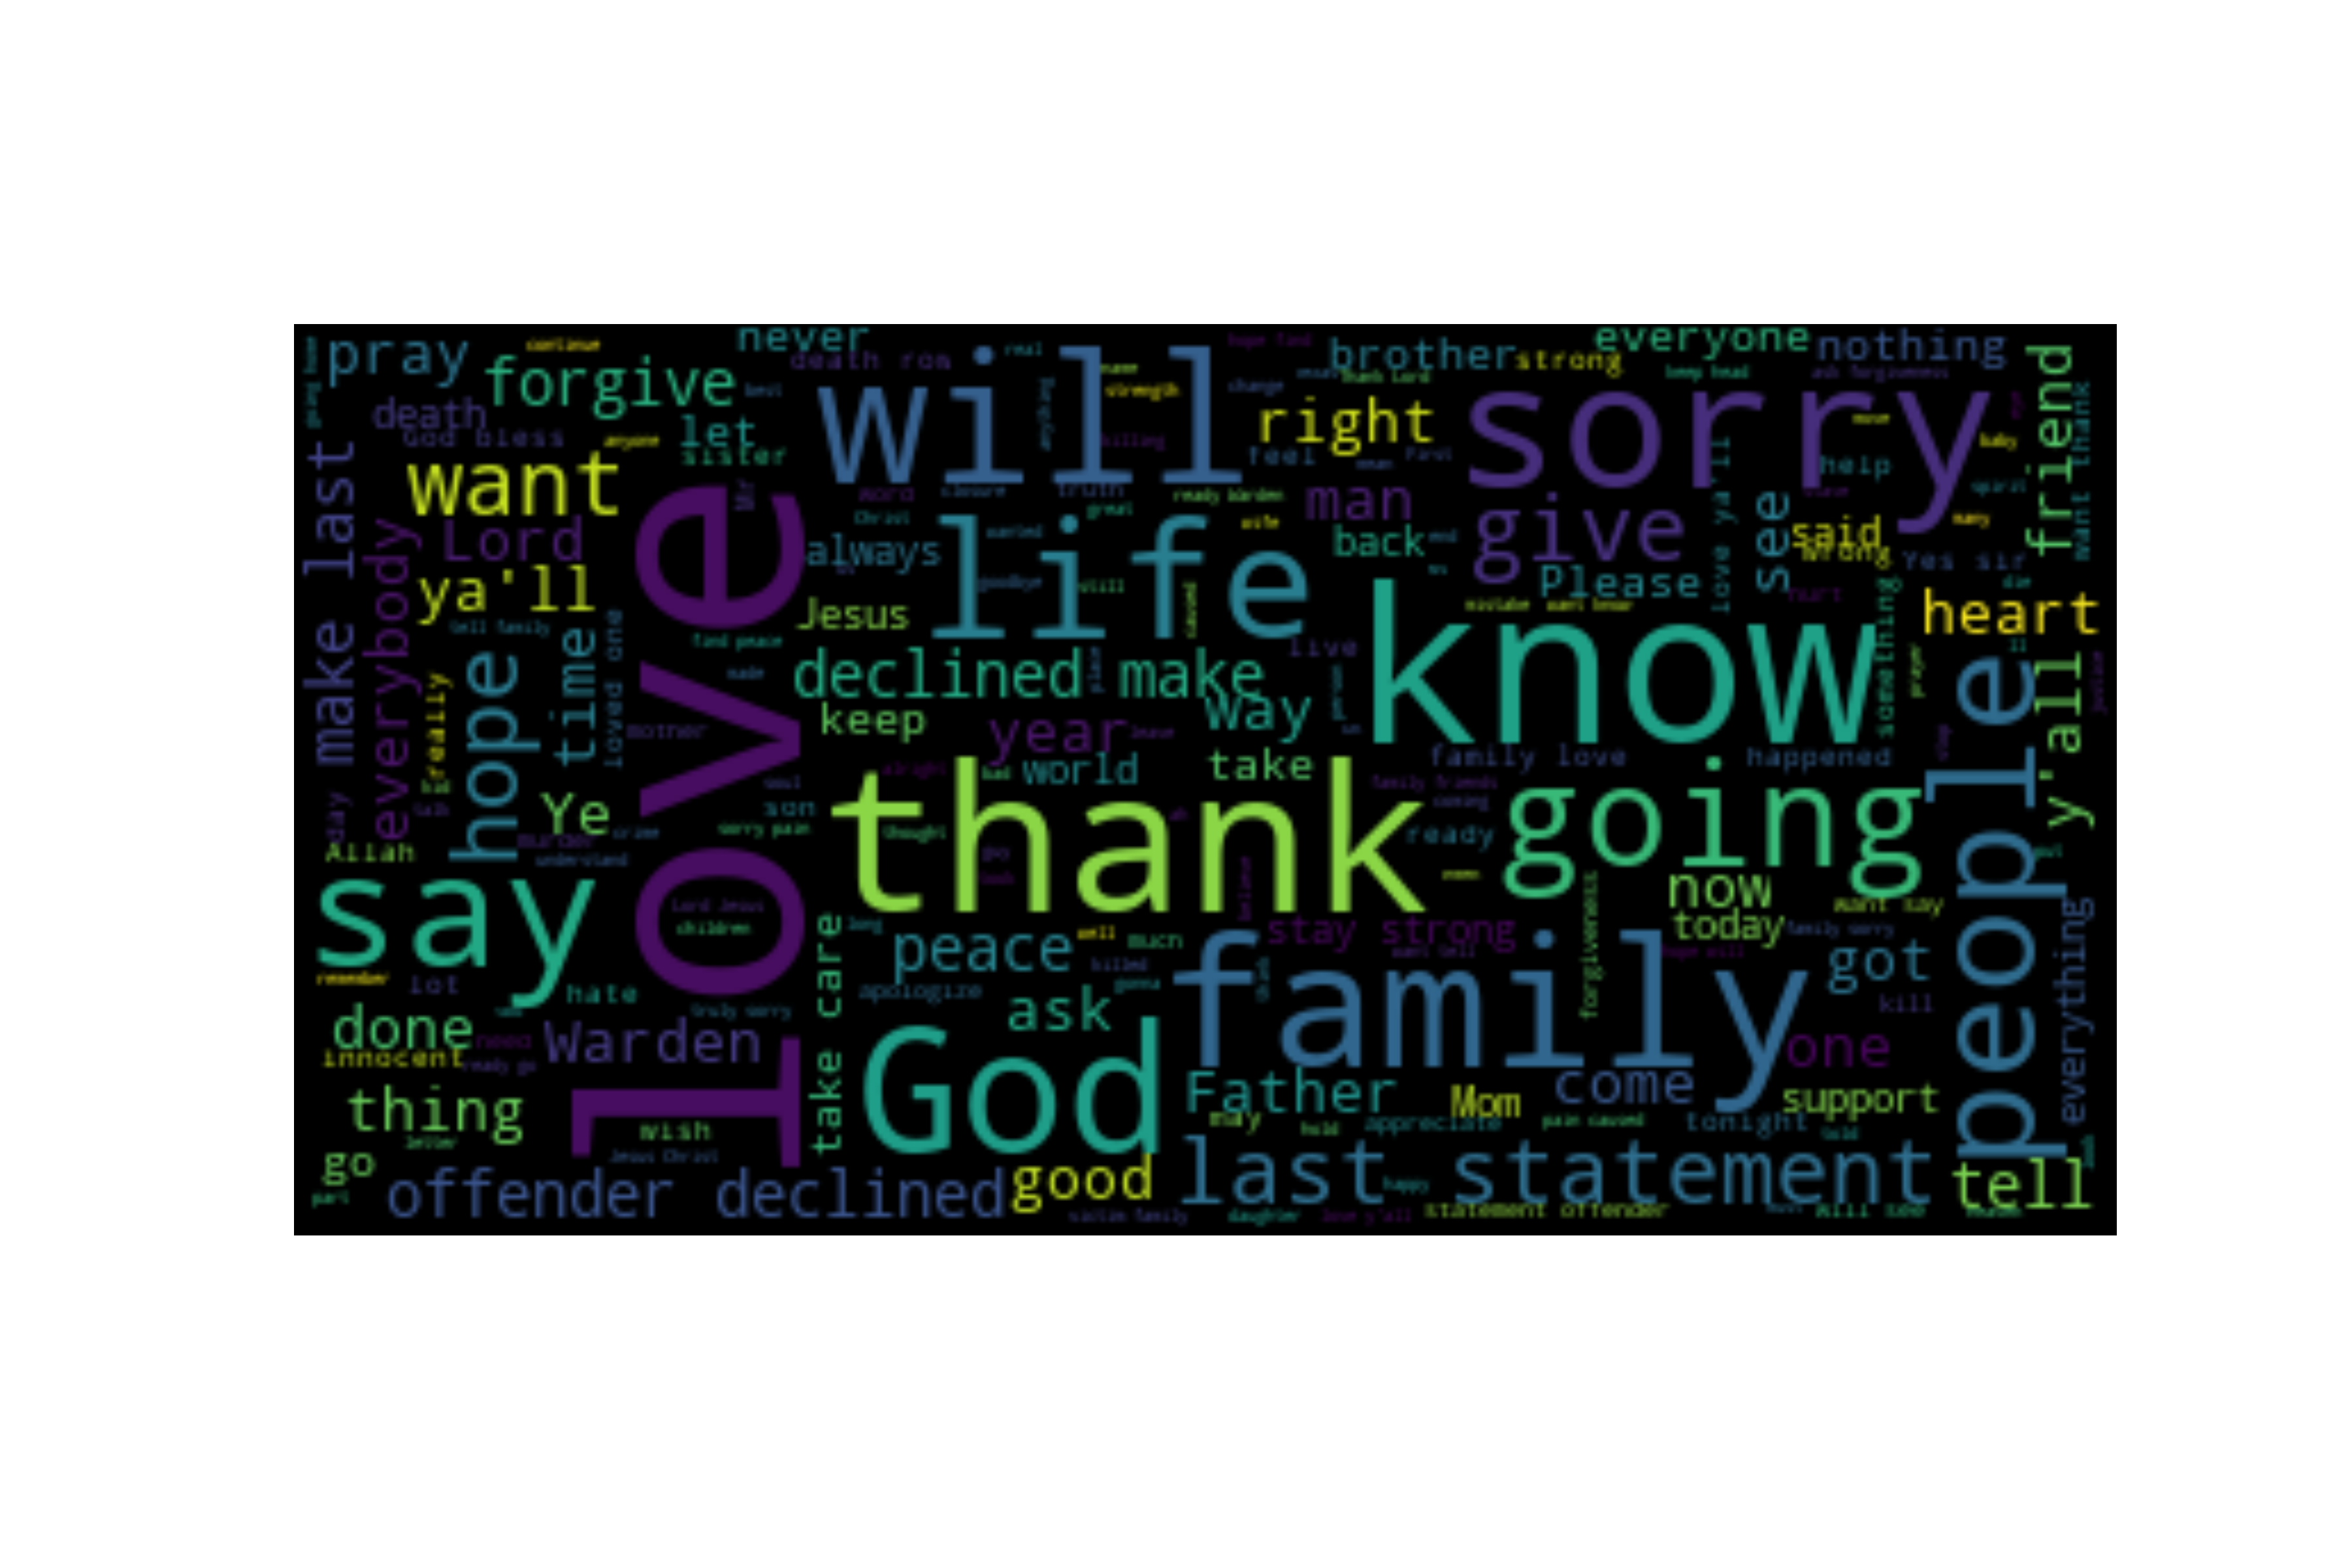 wordcloud for last-statement